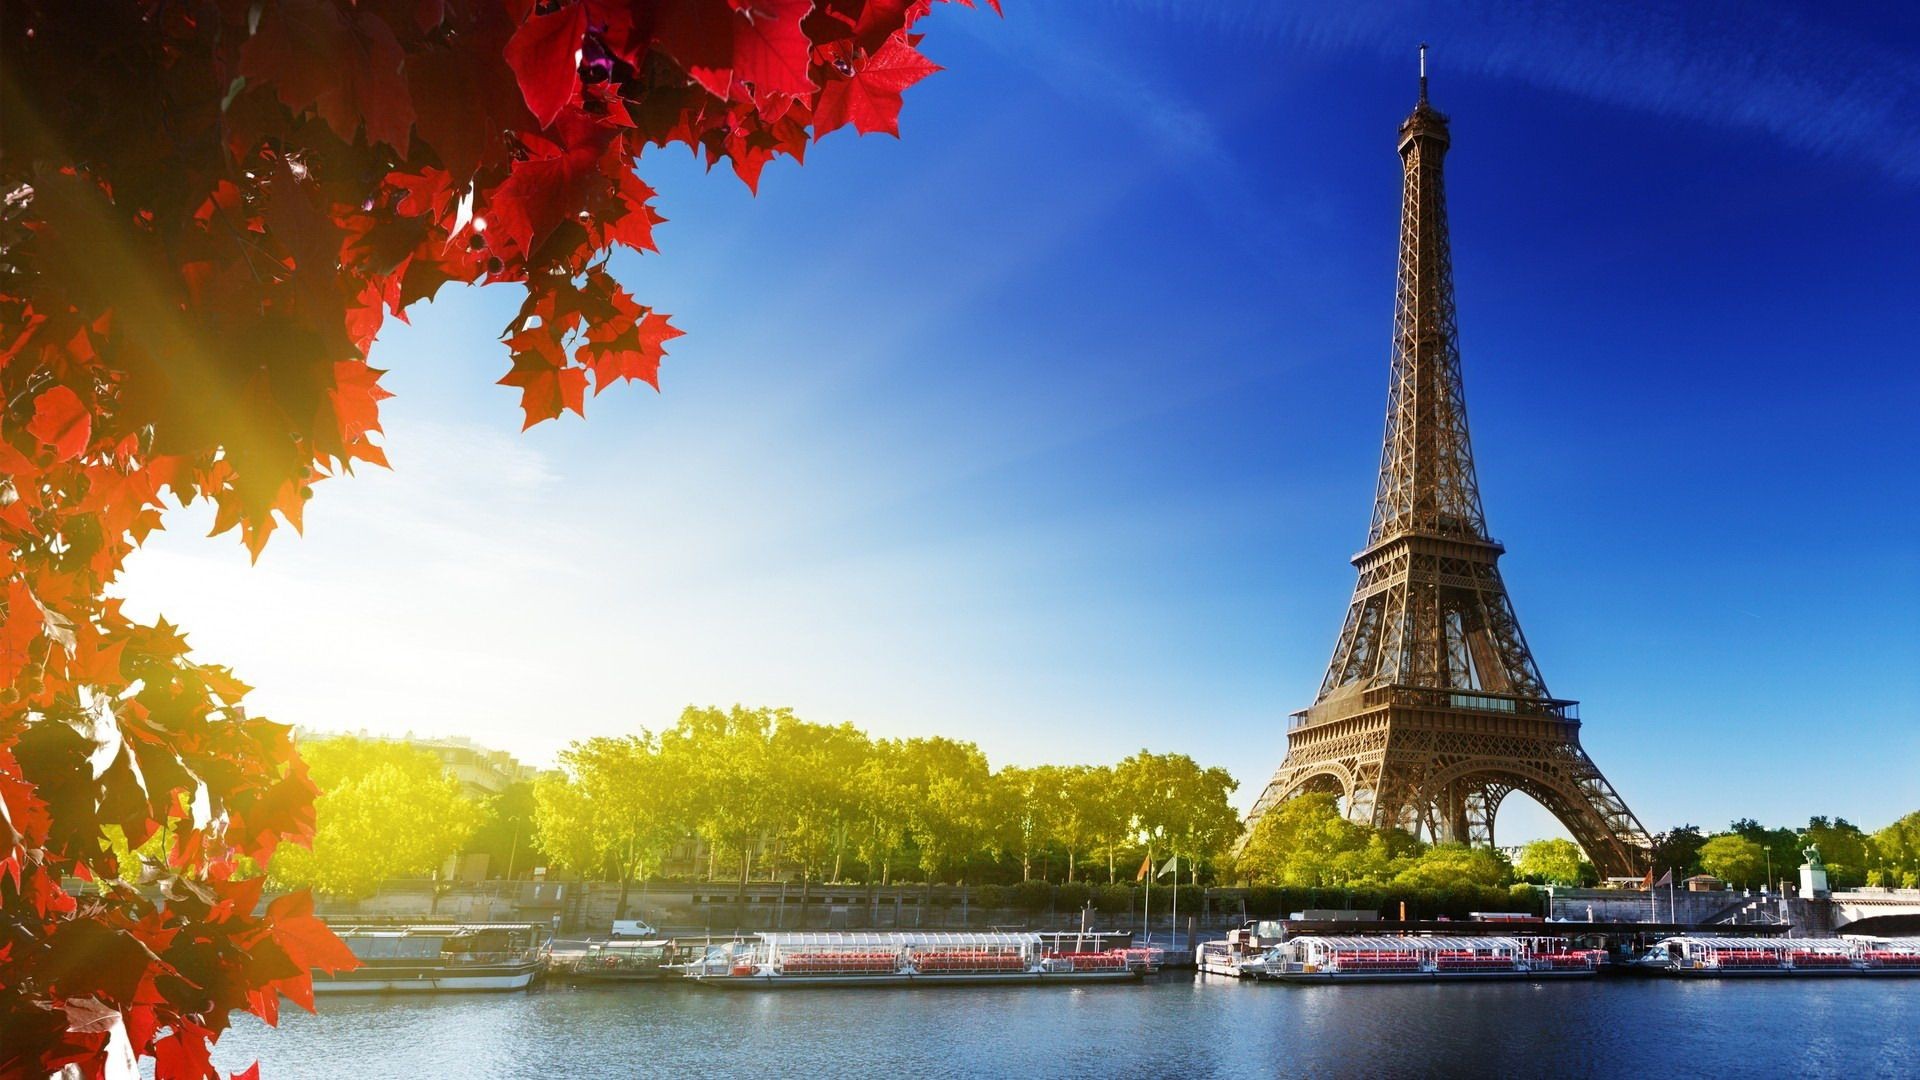 Eiffel Tower, Paris, Sunlight, Water, Trees, River, Boat, Architecture, Leaves, Sky Wallpaper